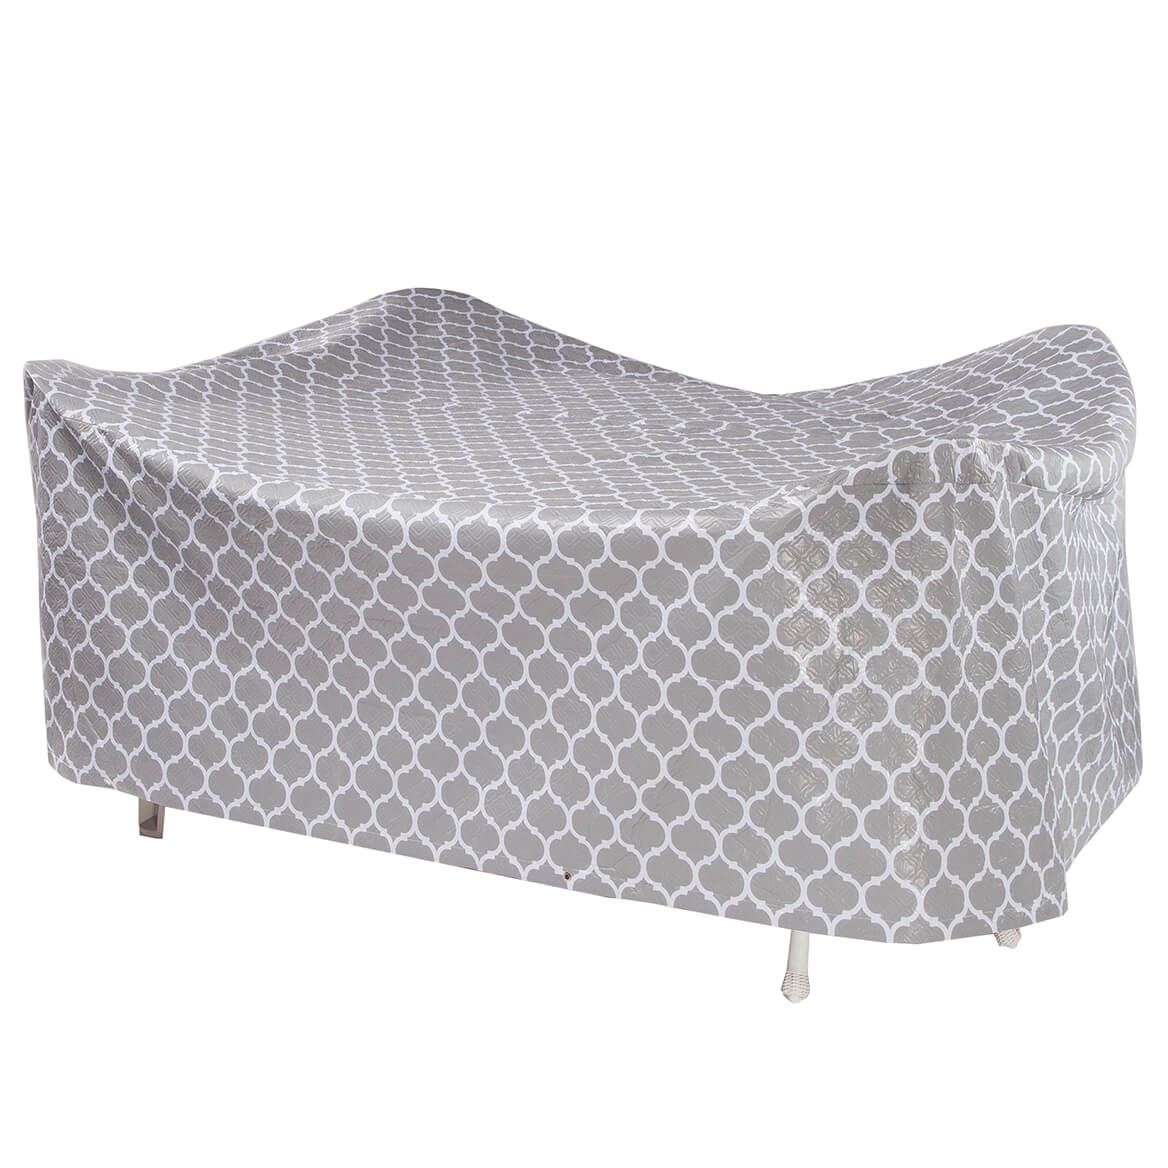 Trellis Pattern Quilted Table Cover Oval, 108"L x 30"H x 84" + '-' + 362887